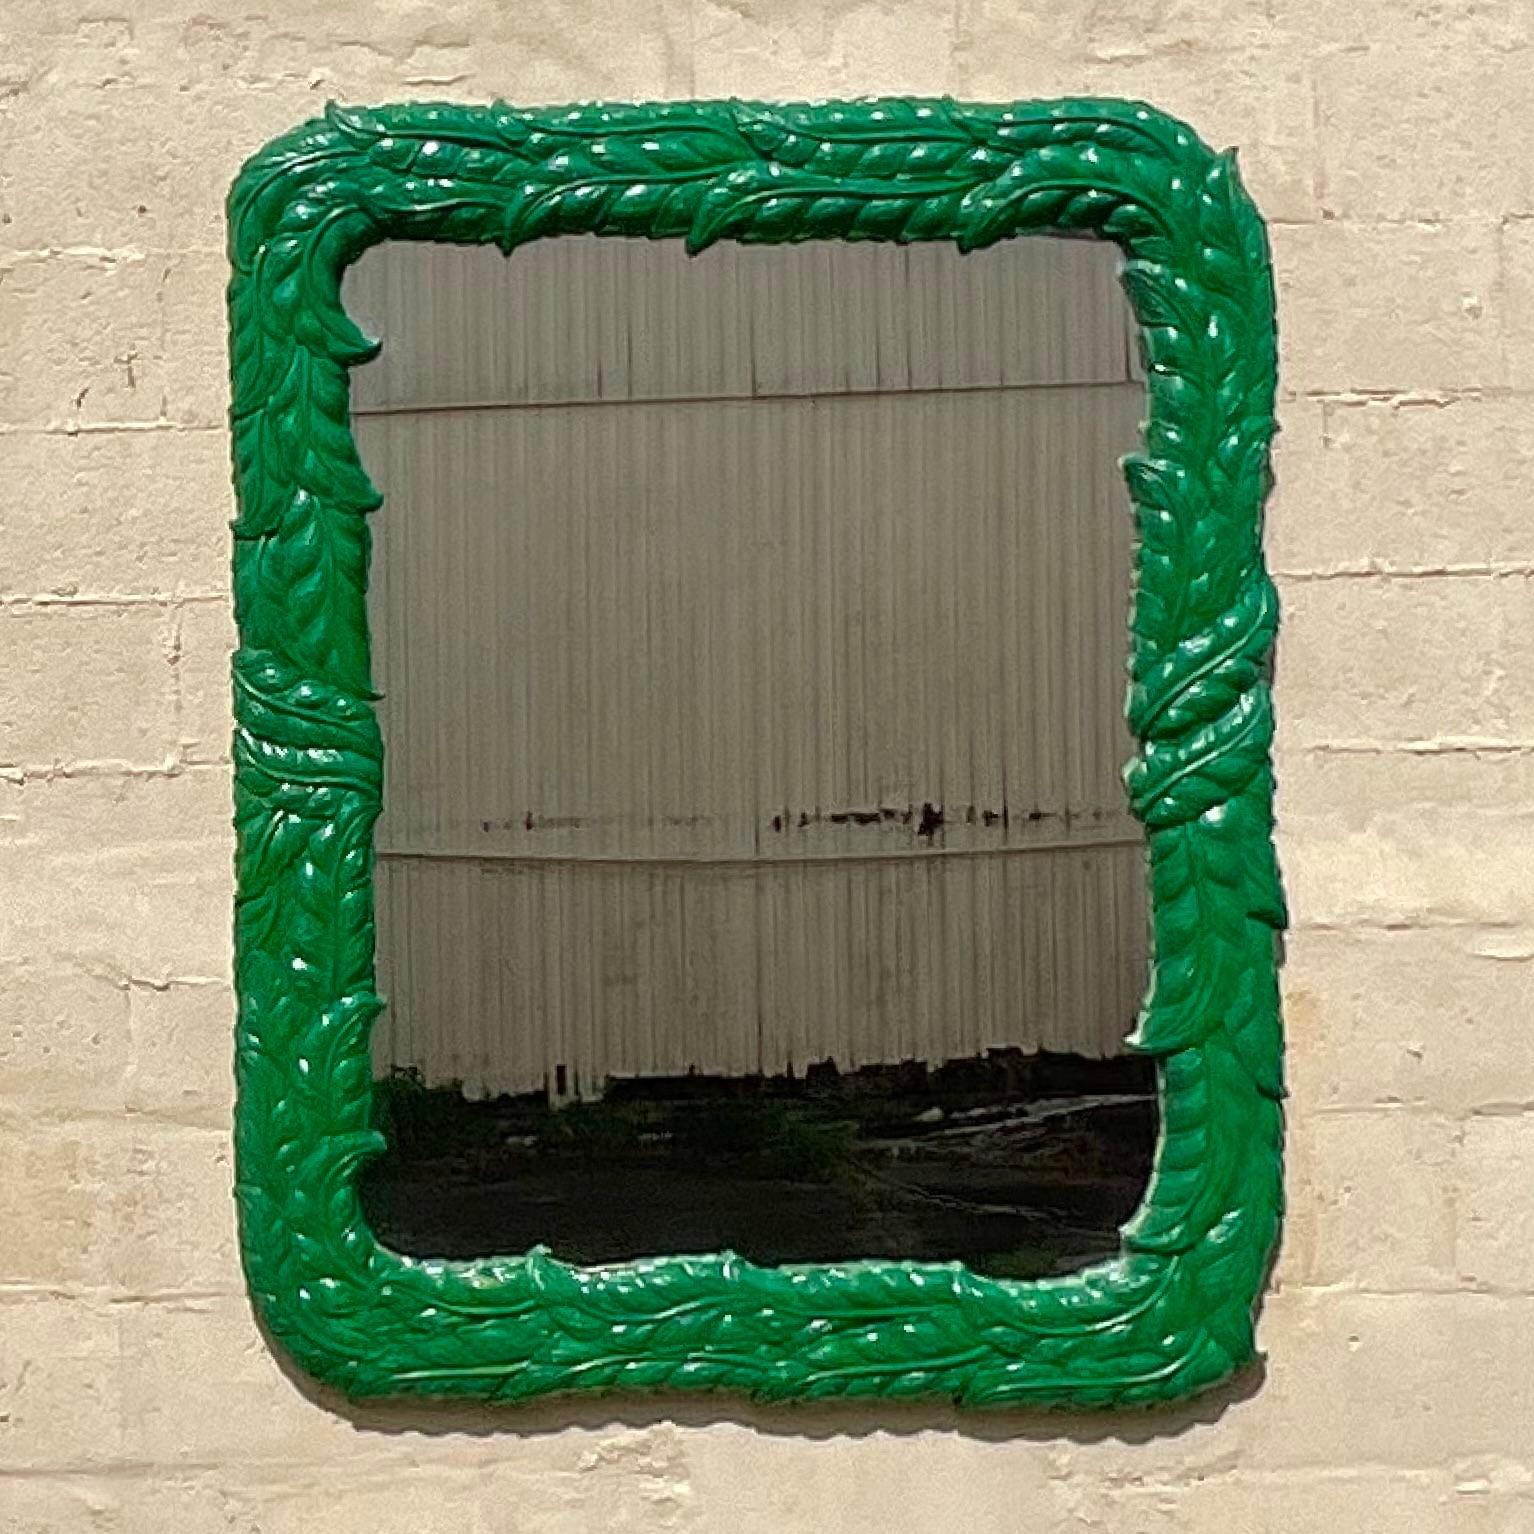 A stunning vintage Coastal wall mirror. A chic molded frame in a glamorous palm frond design. Painted a brilliant Kelly green. Acquired from a Palm Beach estate.